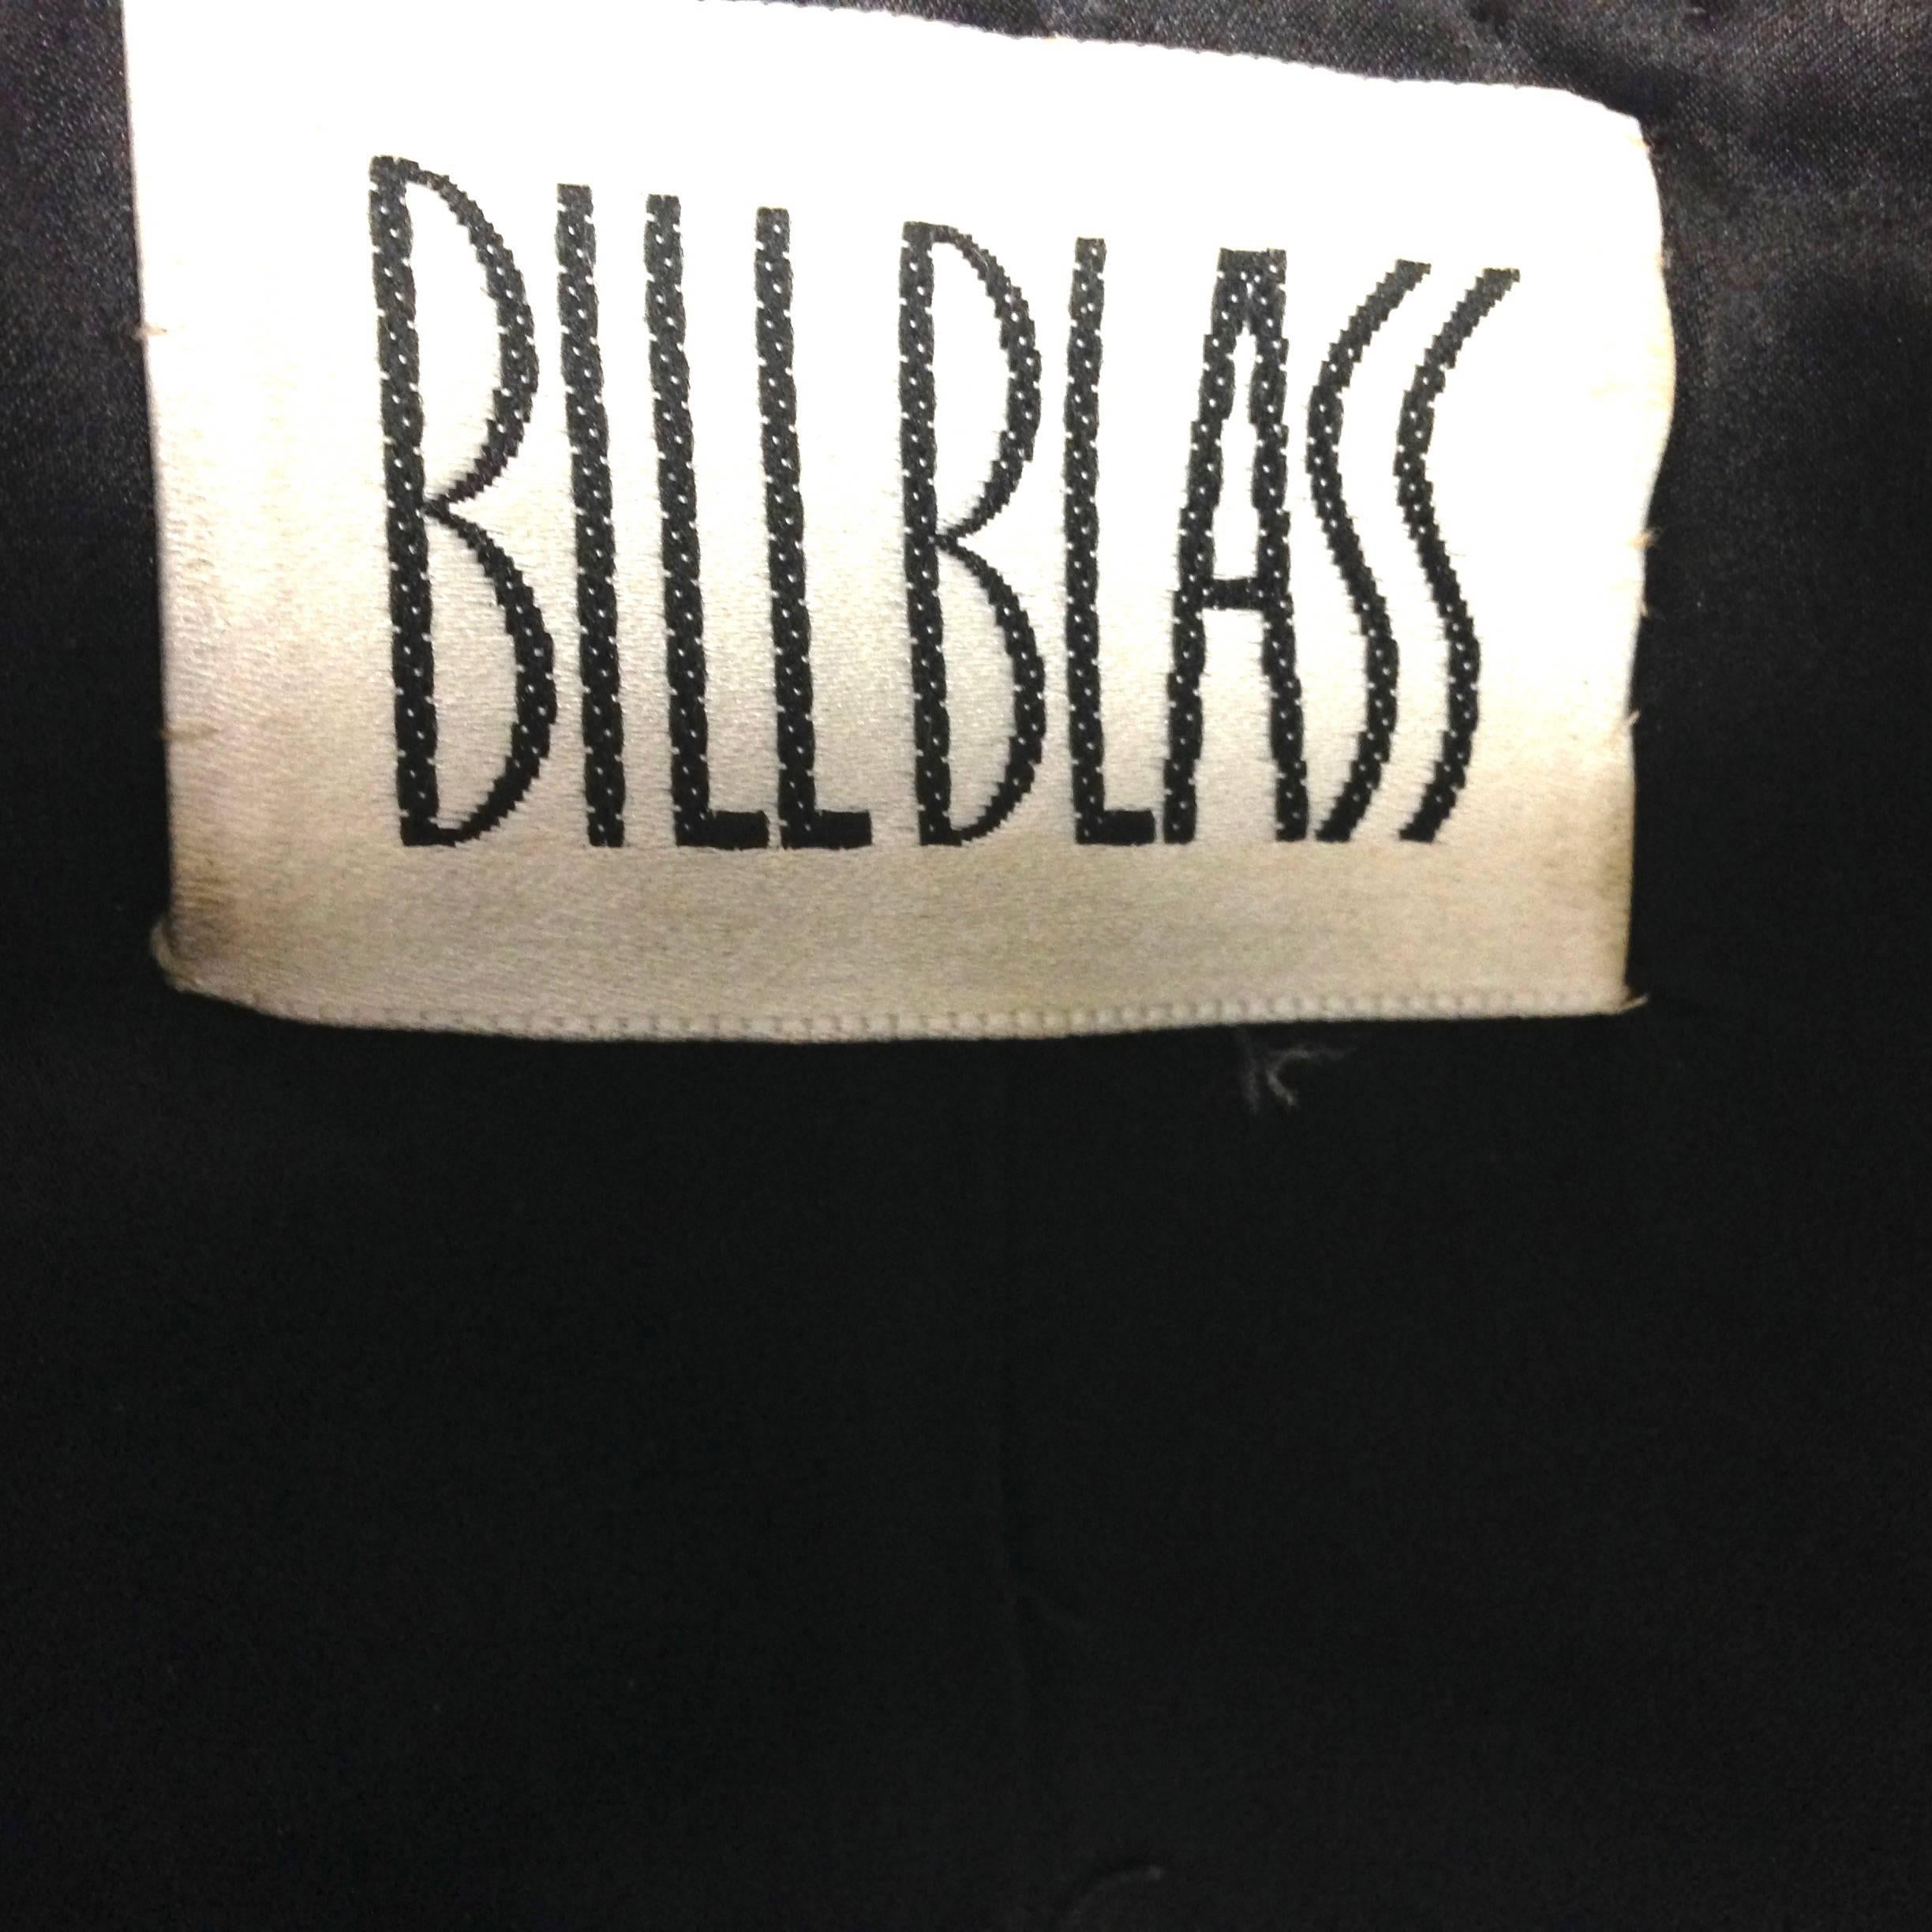 Women's 1980s Bill Blass Black and White Fully Sequined Evening Jacket